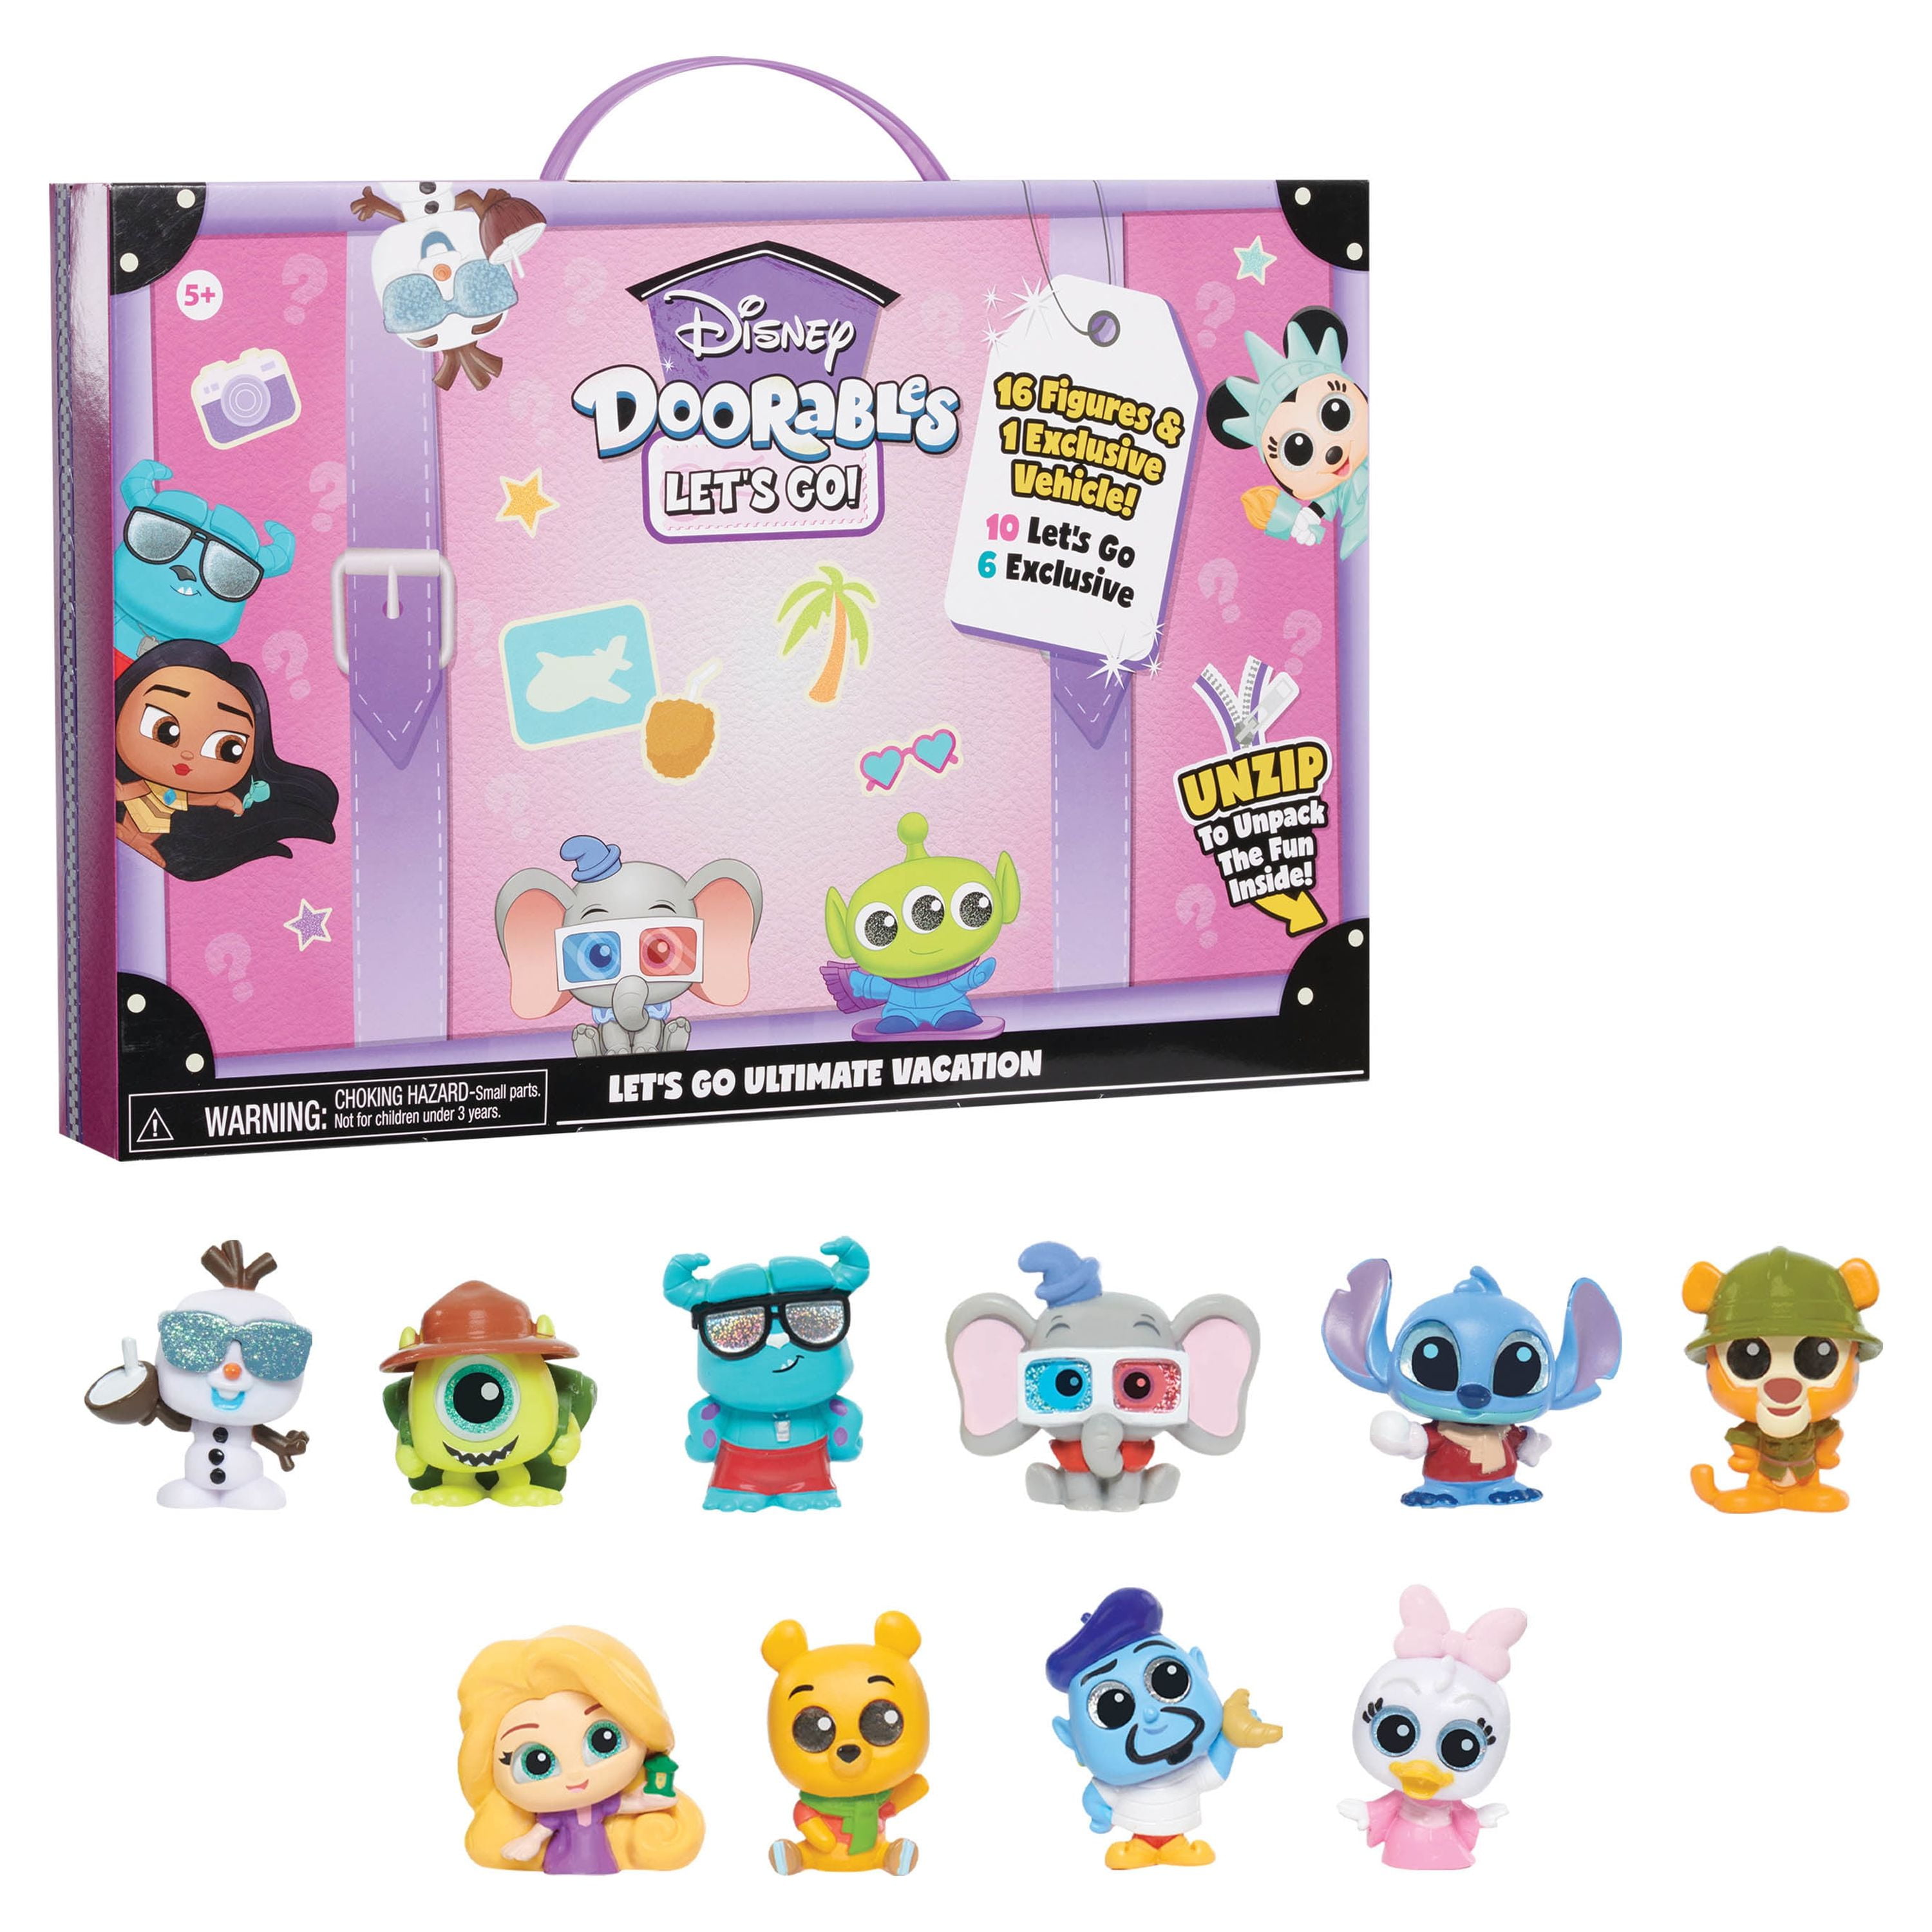 Disney Doorables Multi Peek Series 9, Collectible Blind Bag Figures,  Officially Licensed Kids Toys for Ages 5 Up, Gifts and Presents